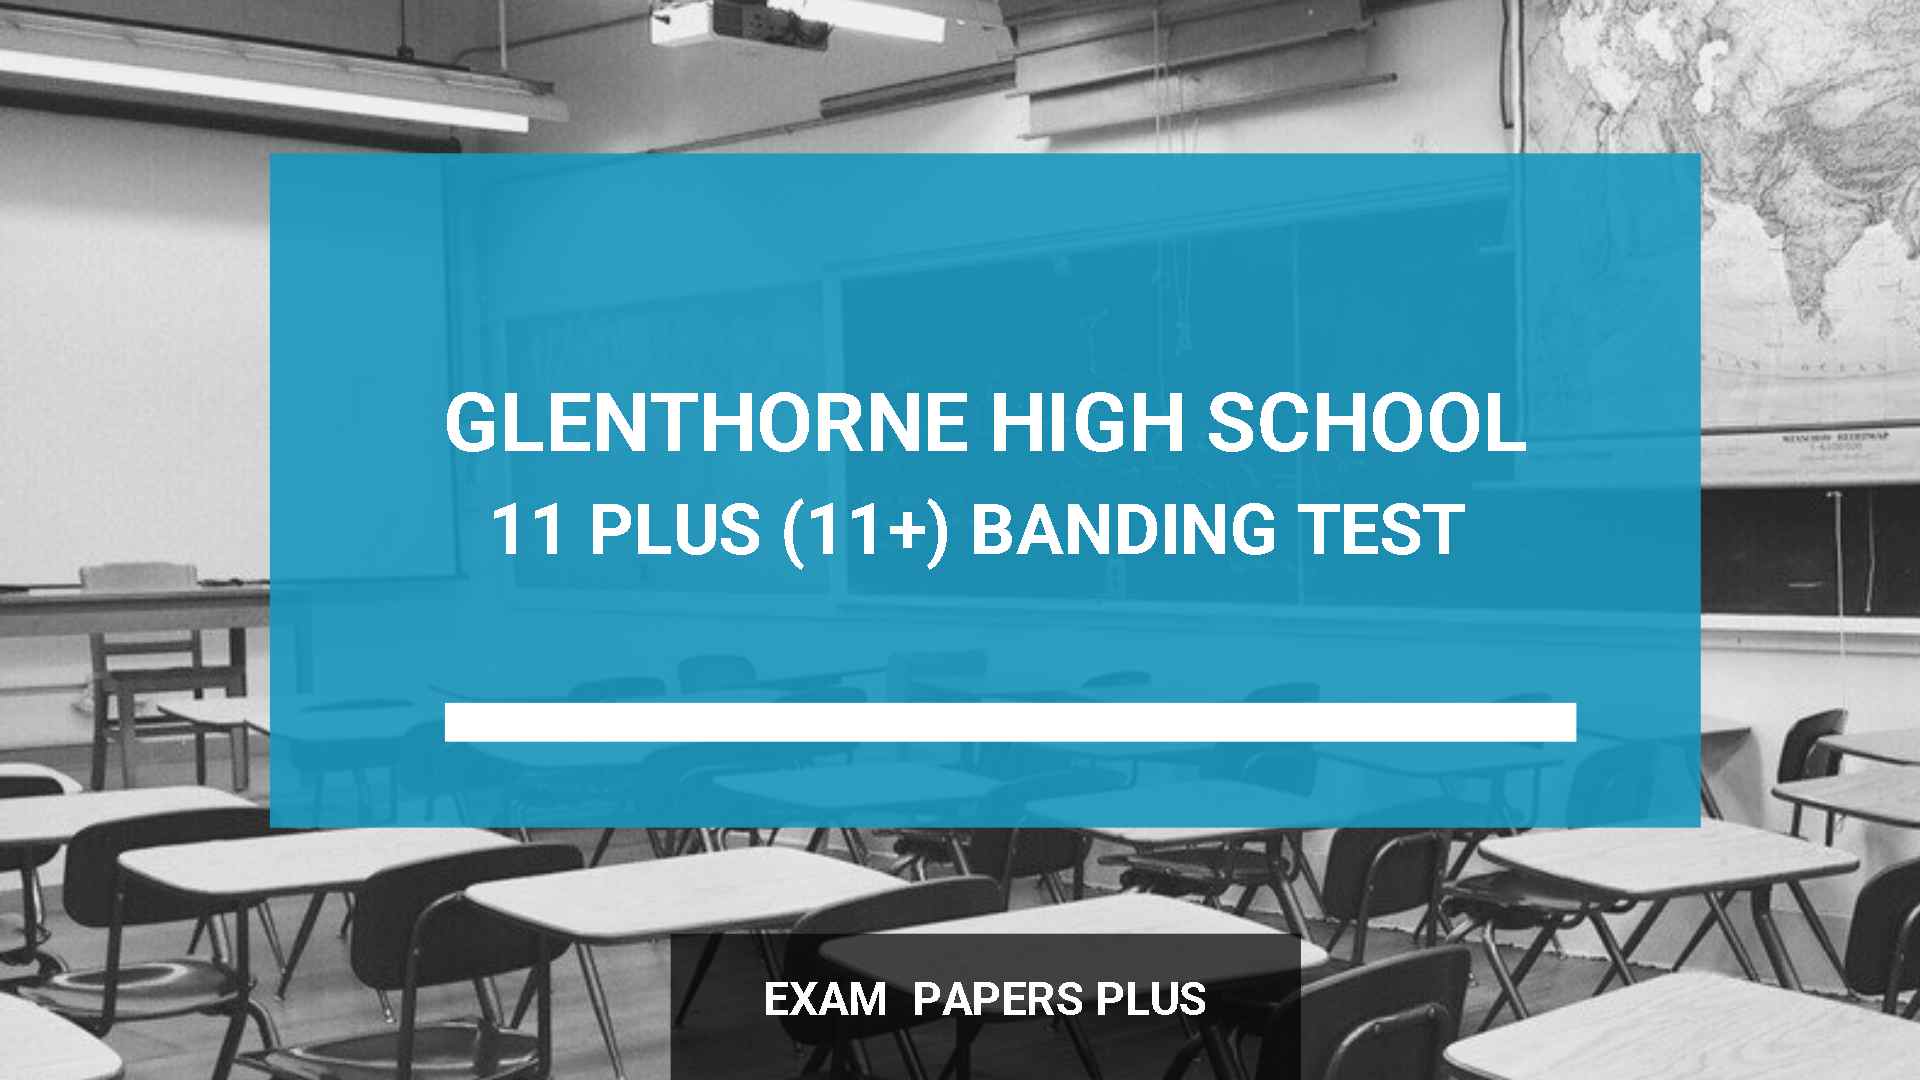 banding-test-key-details-about-11-plus-entry-to-glenthorne-high-school